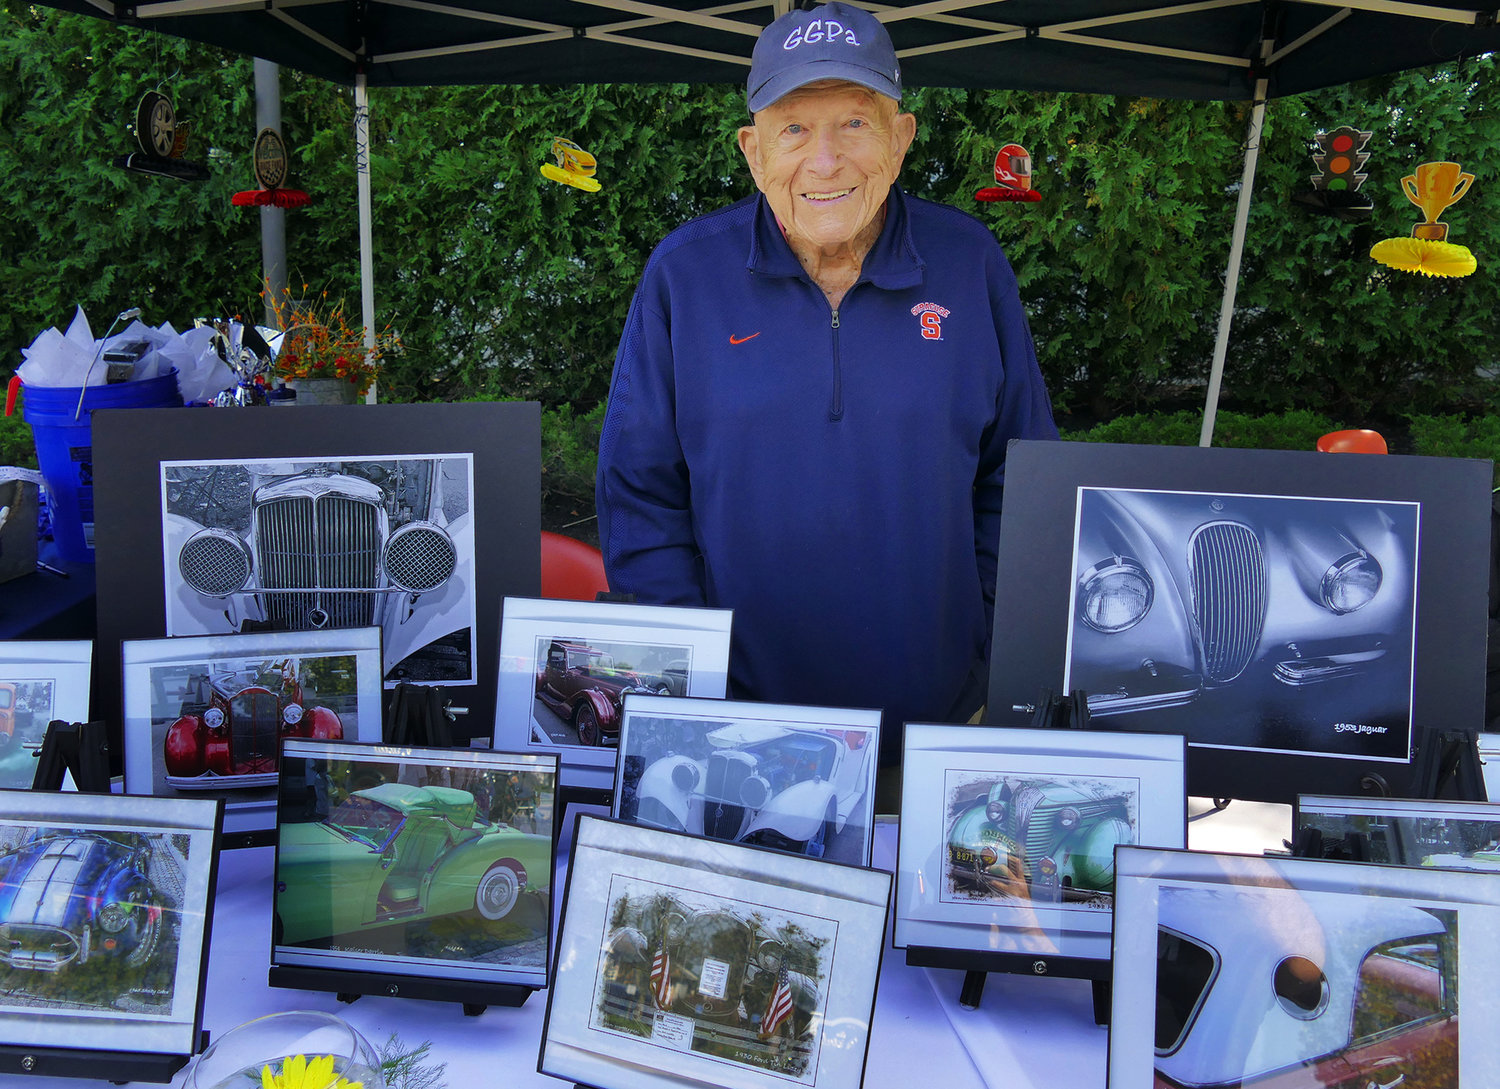 Stanley Mutterperl, a resident living at The Bristal in North Woodmere, has a soft spot for antique cars, having taken dozens of photographs of them during his life.